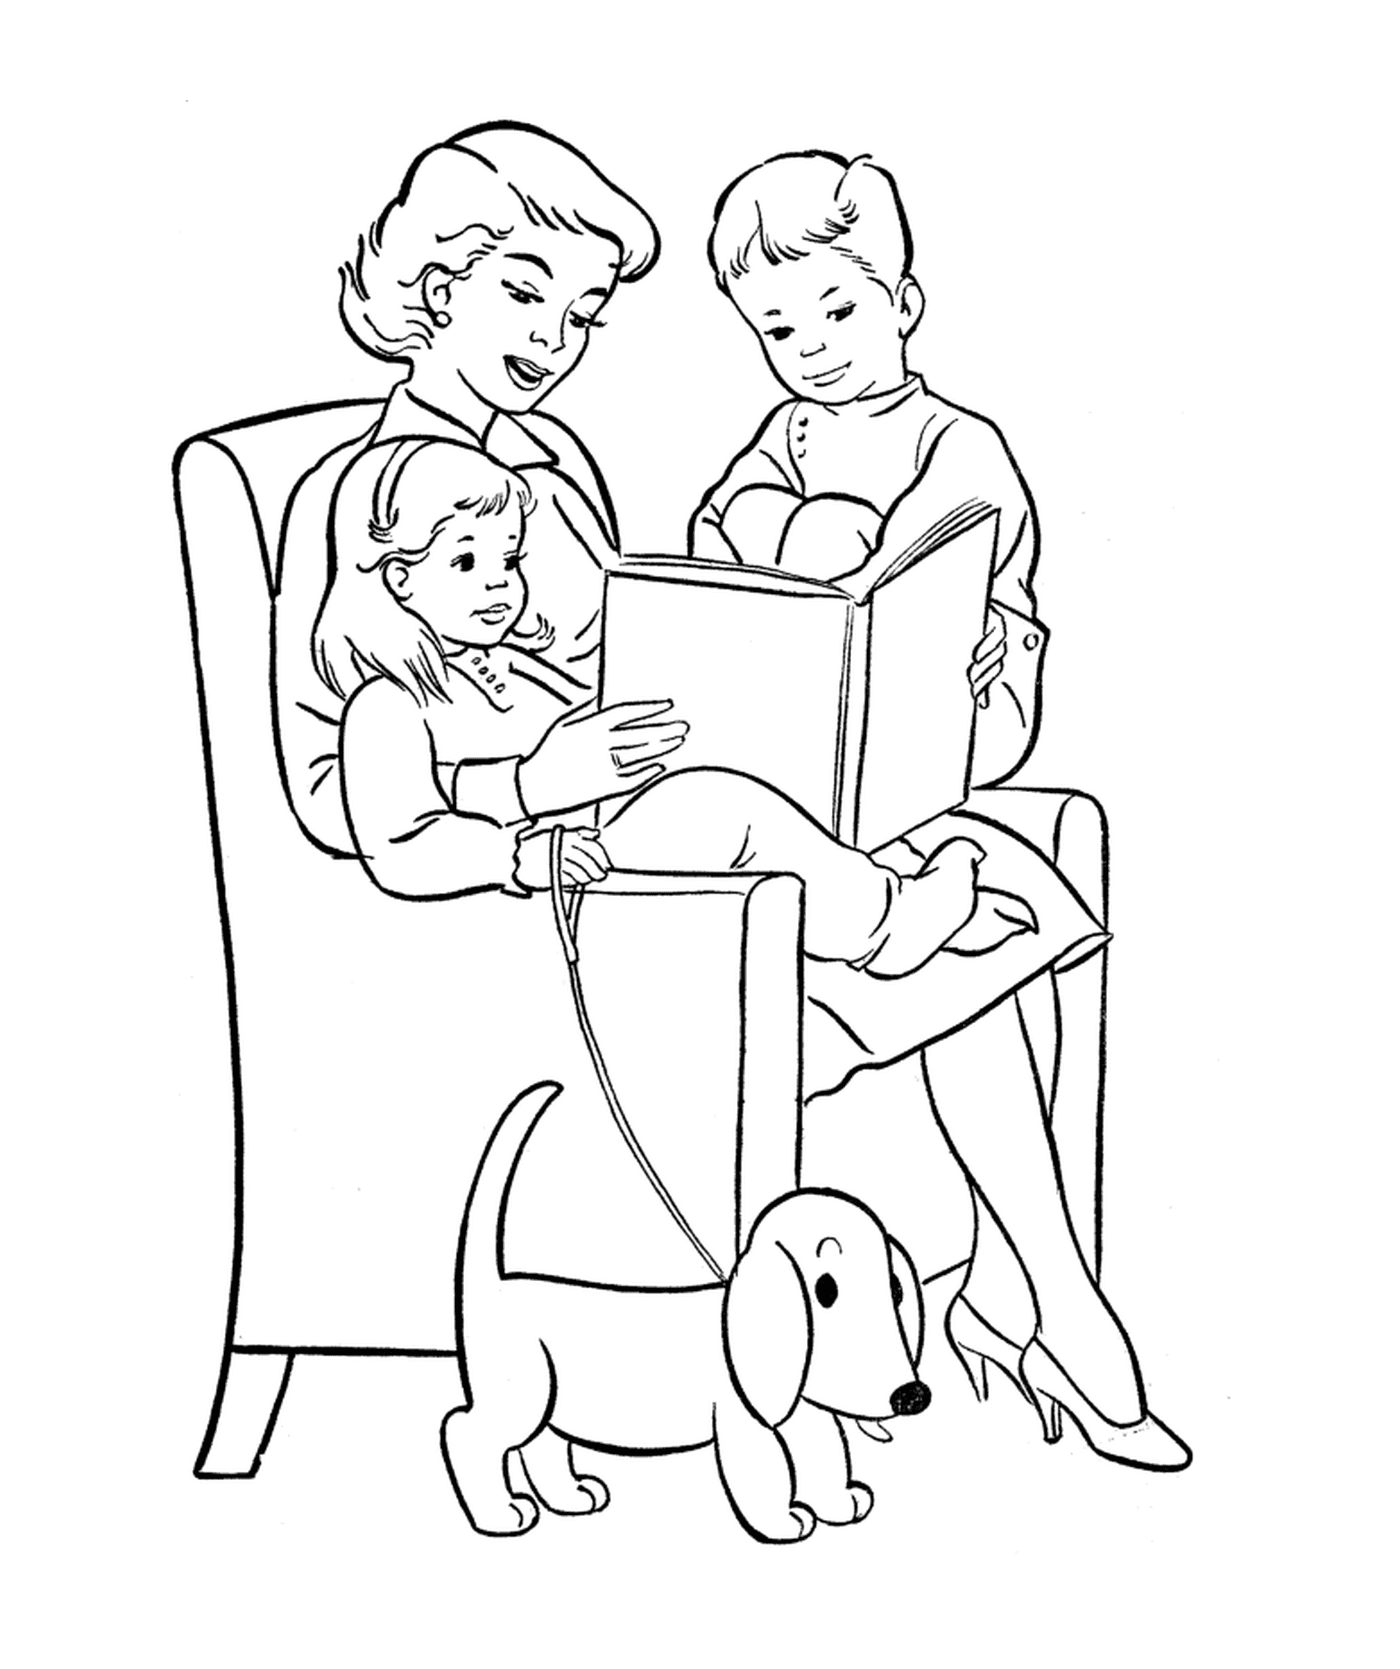  A woman reading a book with two children 